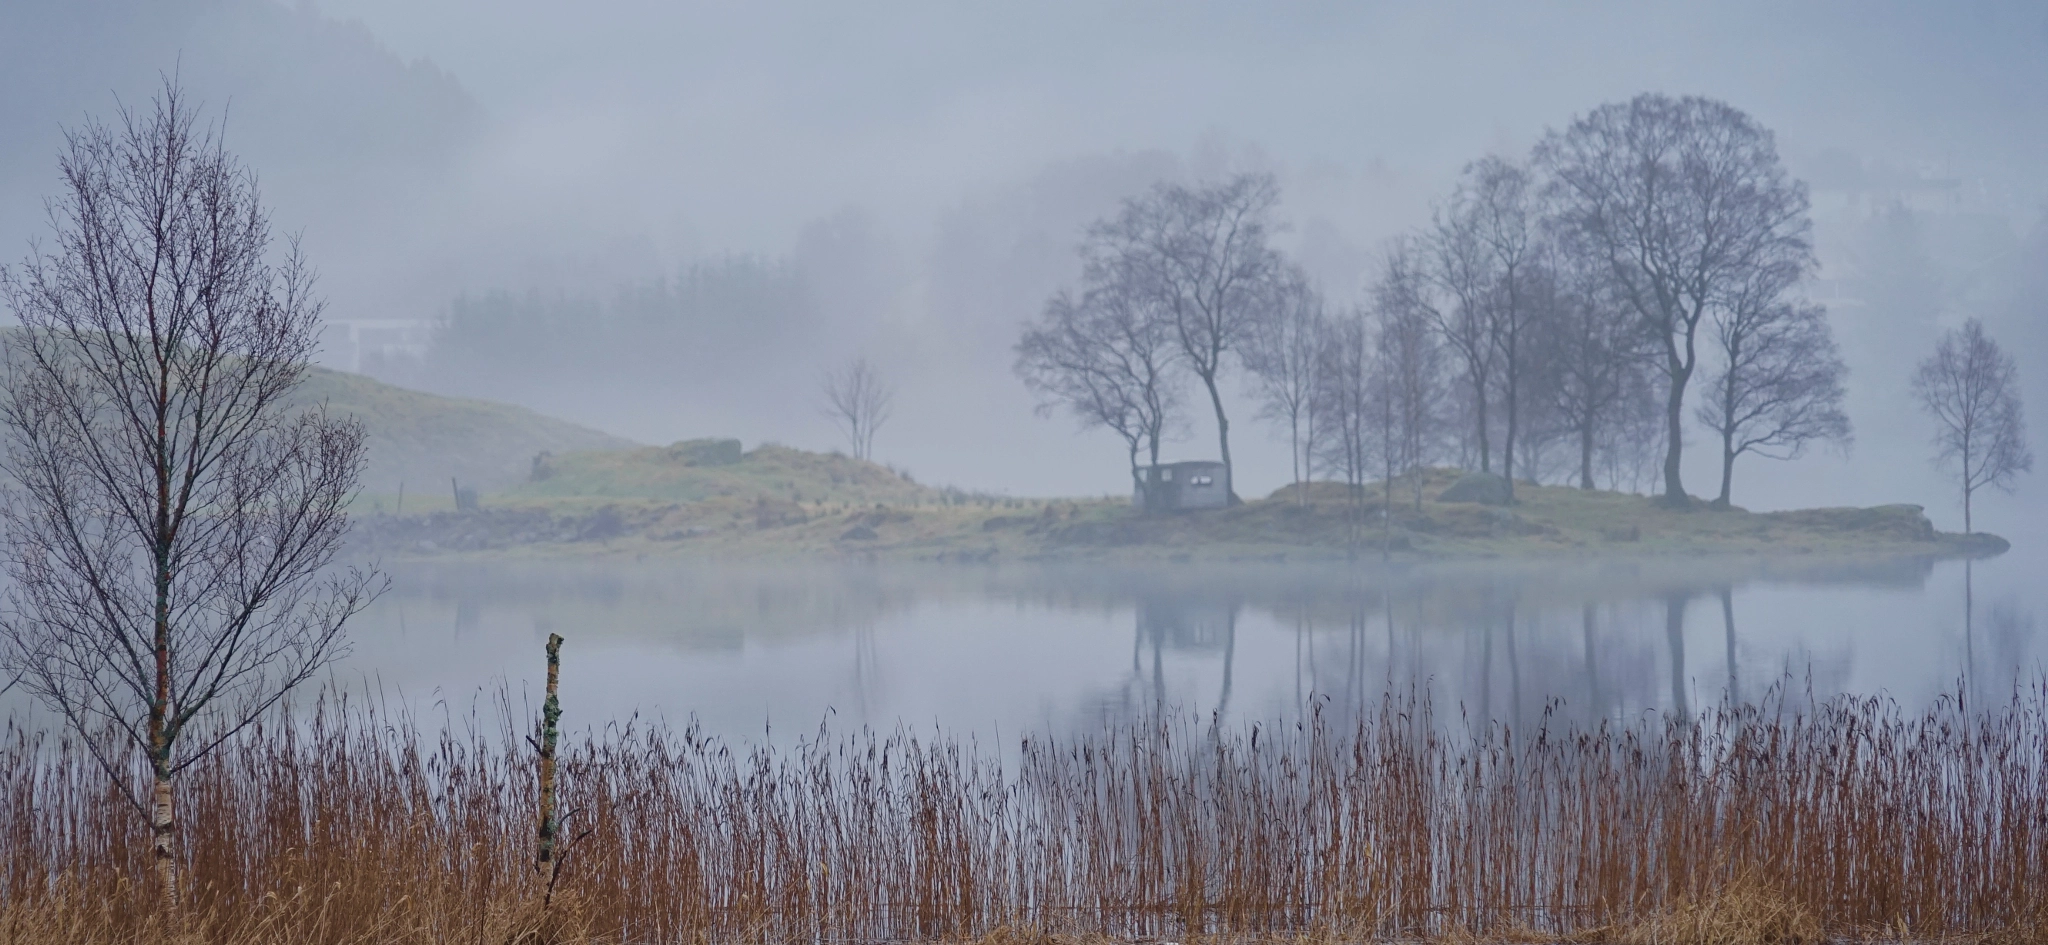 Sony a7 + Sony FE 24-240mm F3.5-6.3 OSS sample photo. In the fog. langavatnet in bergen, norway photography